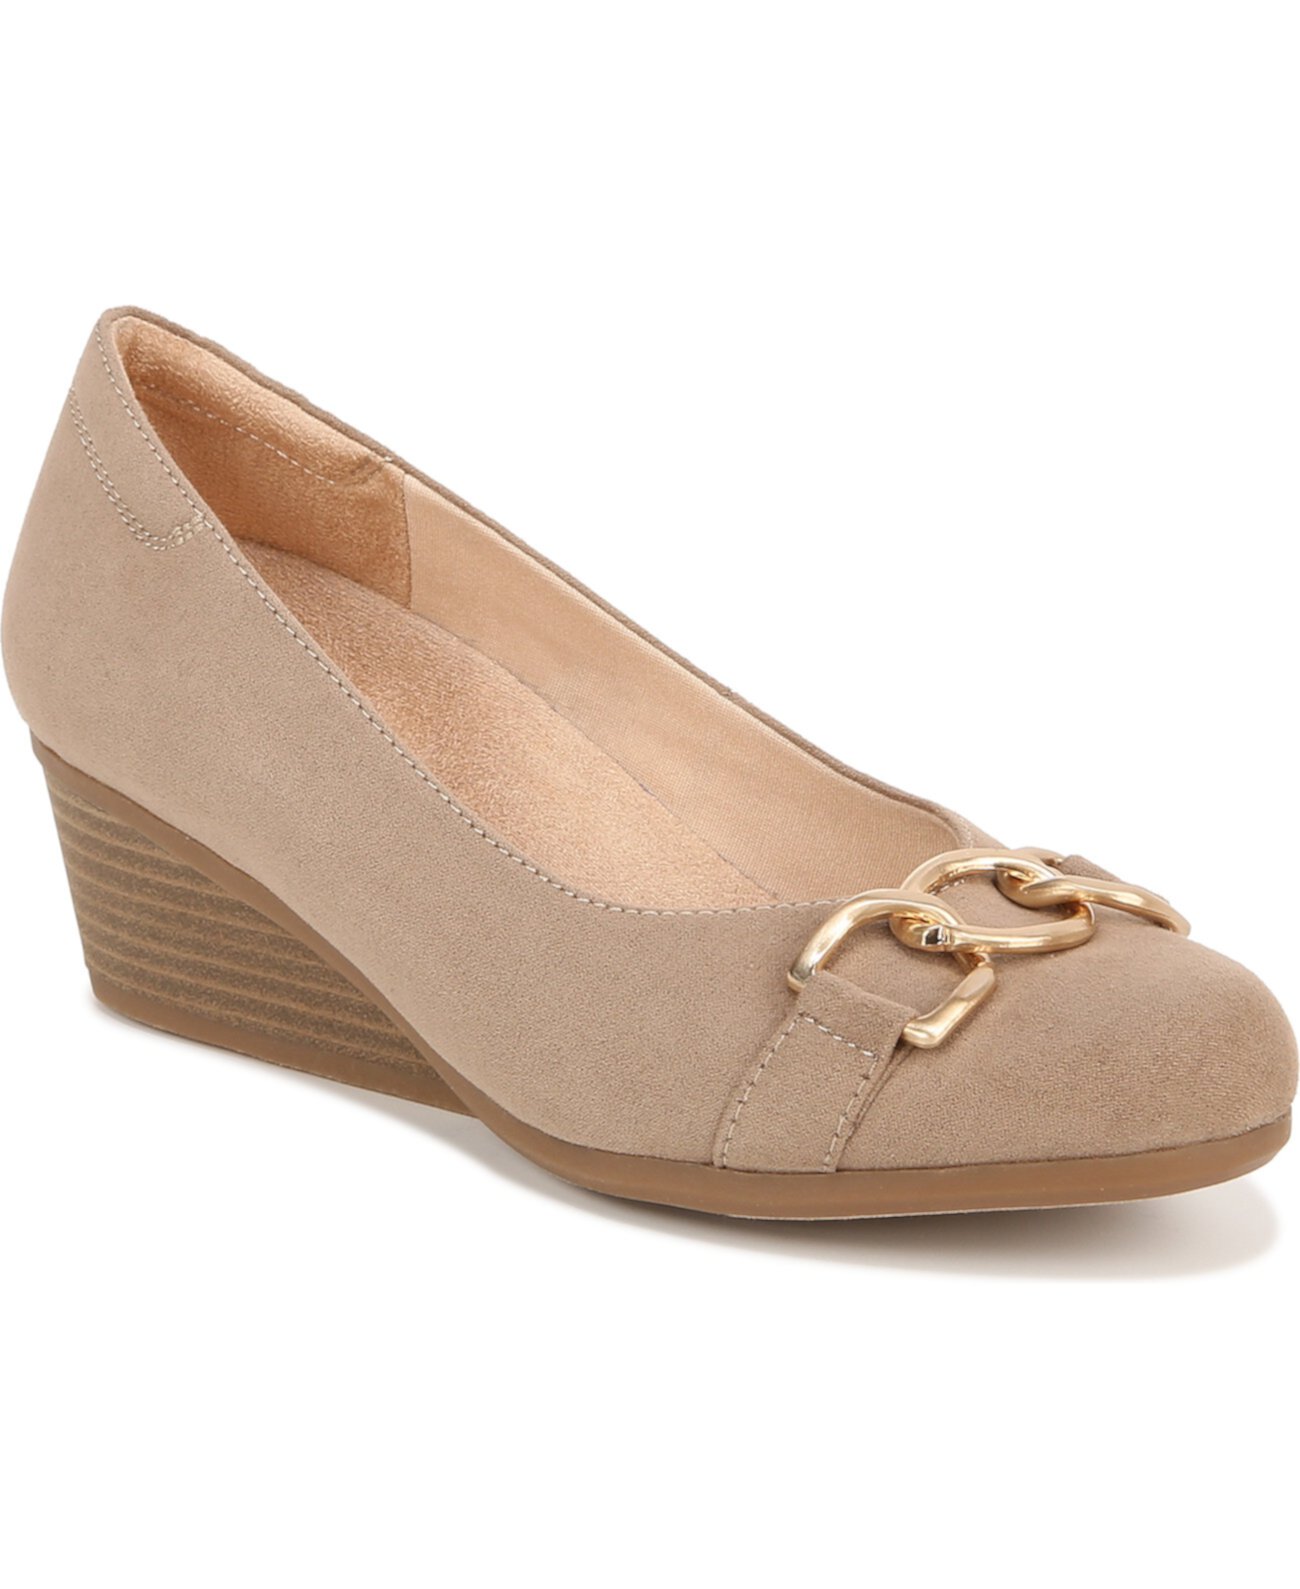 Women's Be Adorned Wedge Pumps Dr. Scholl's